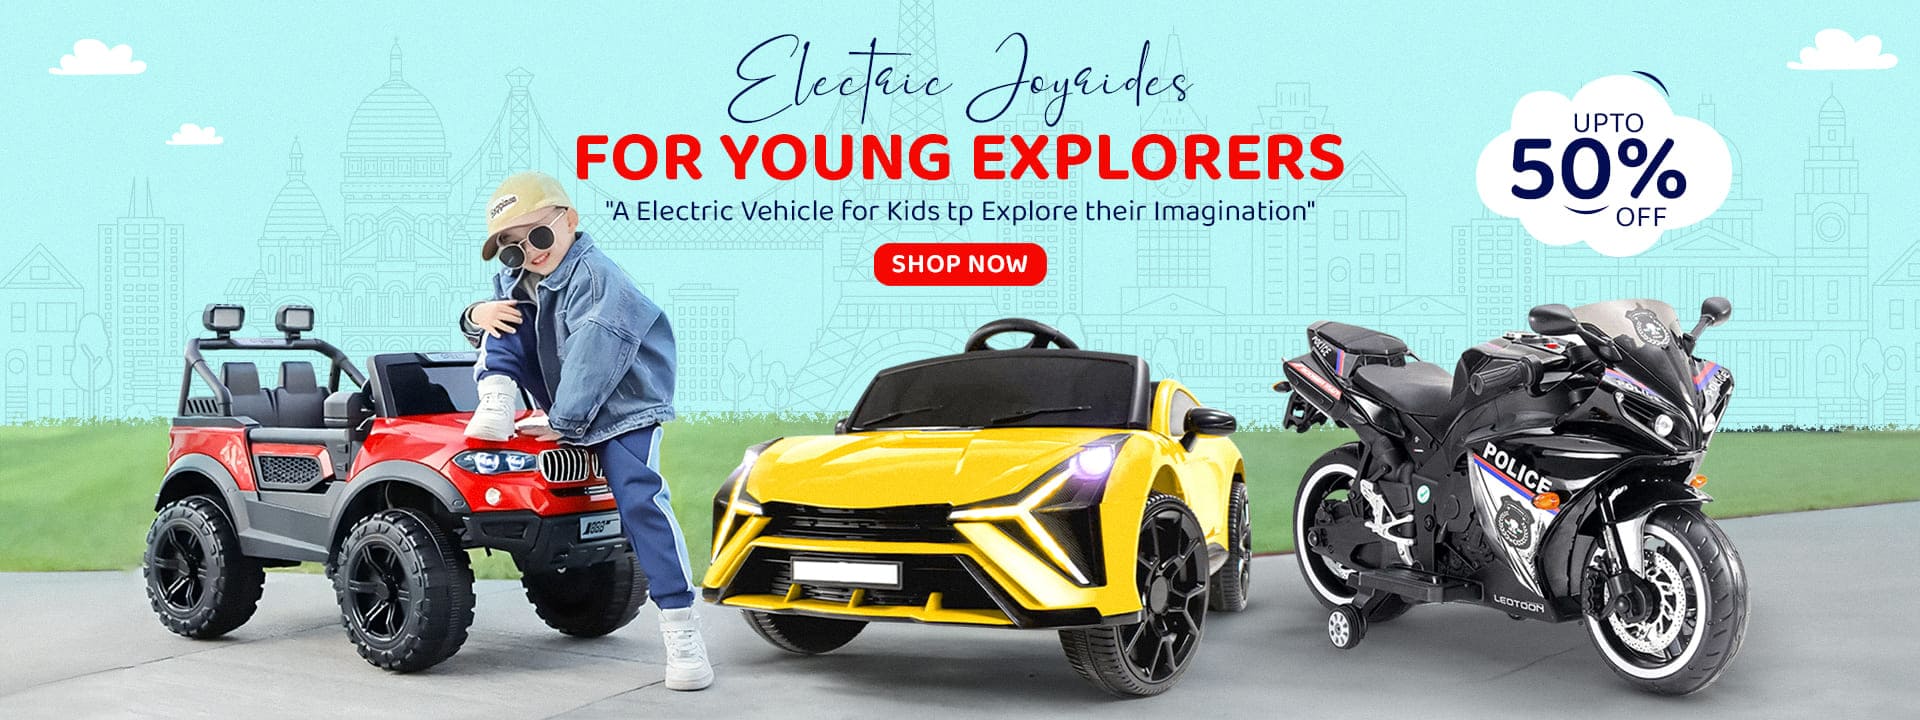 Electric Joy Ride For Young Explorers